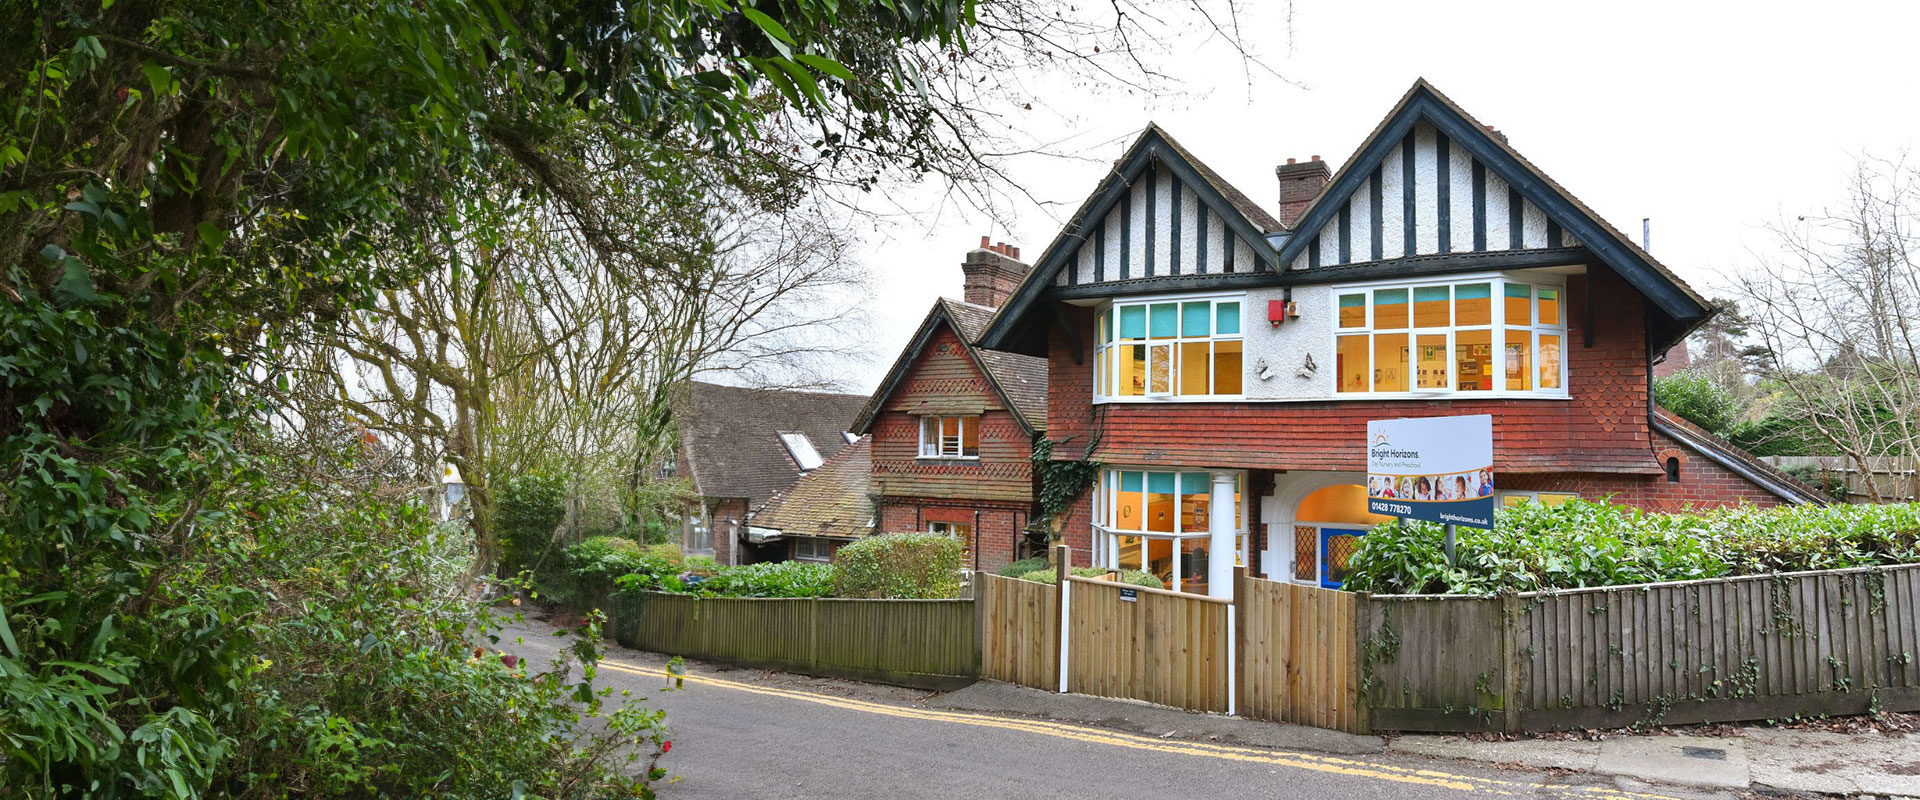 Bright horizons Haslemere Day Nursery and Preschool